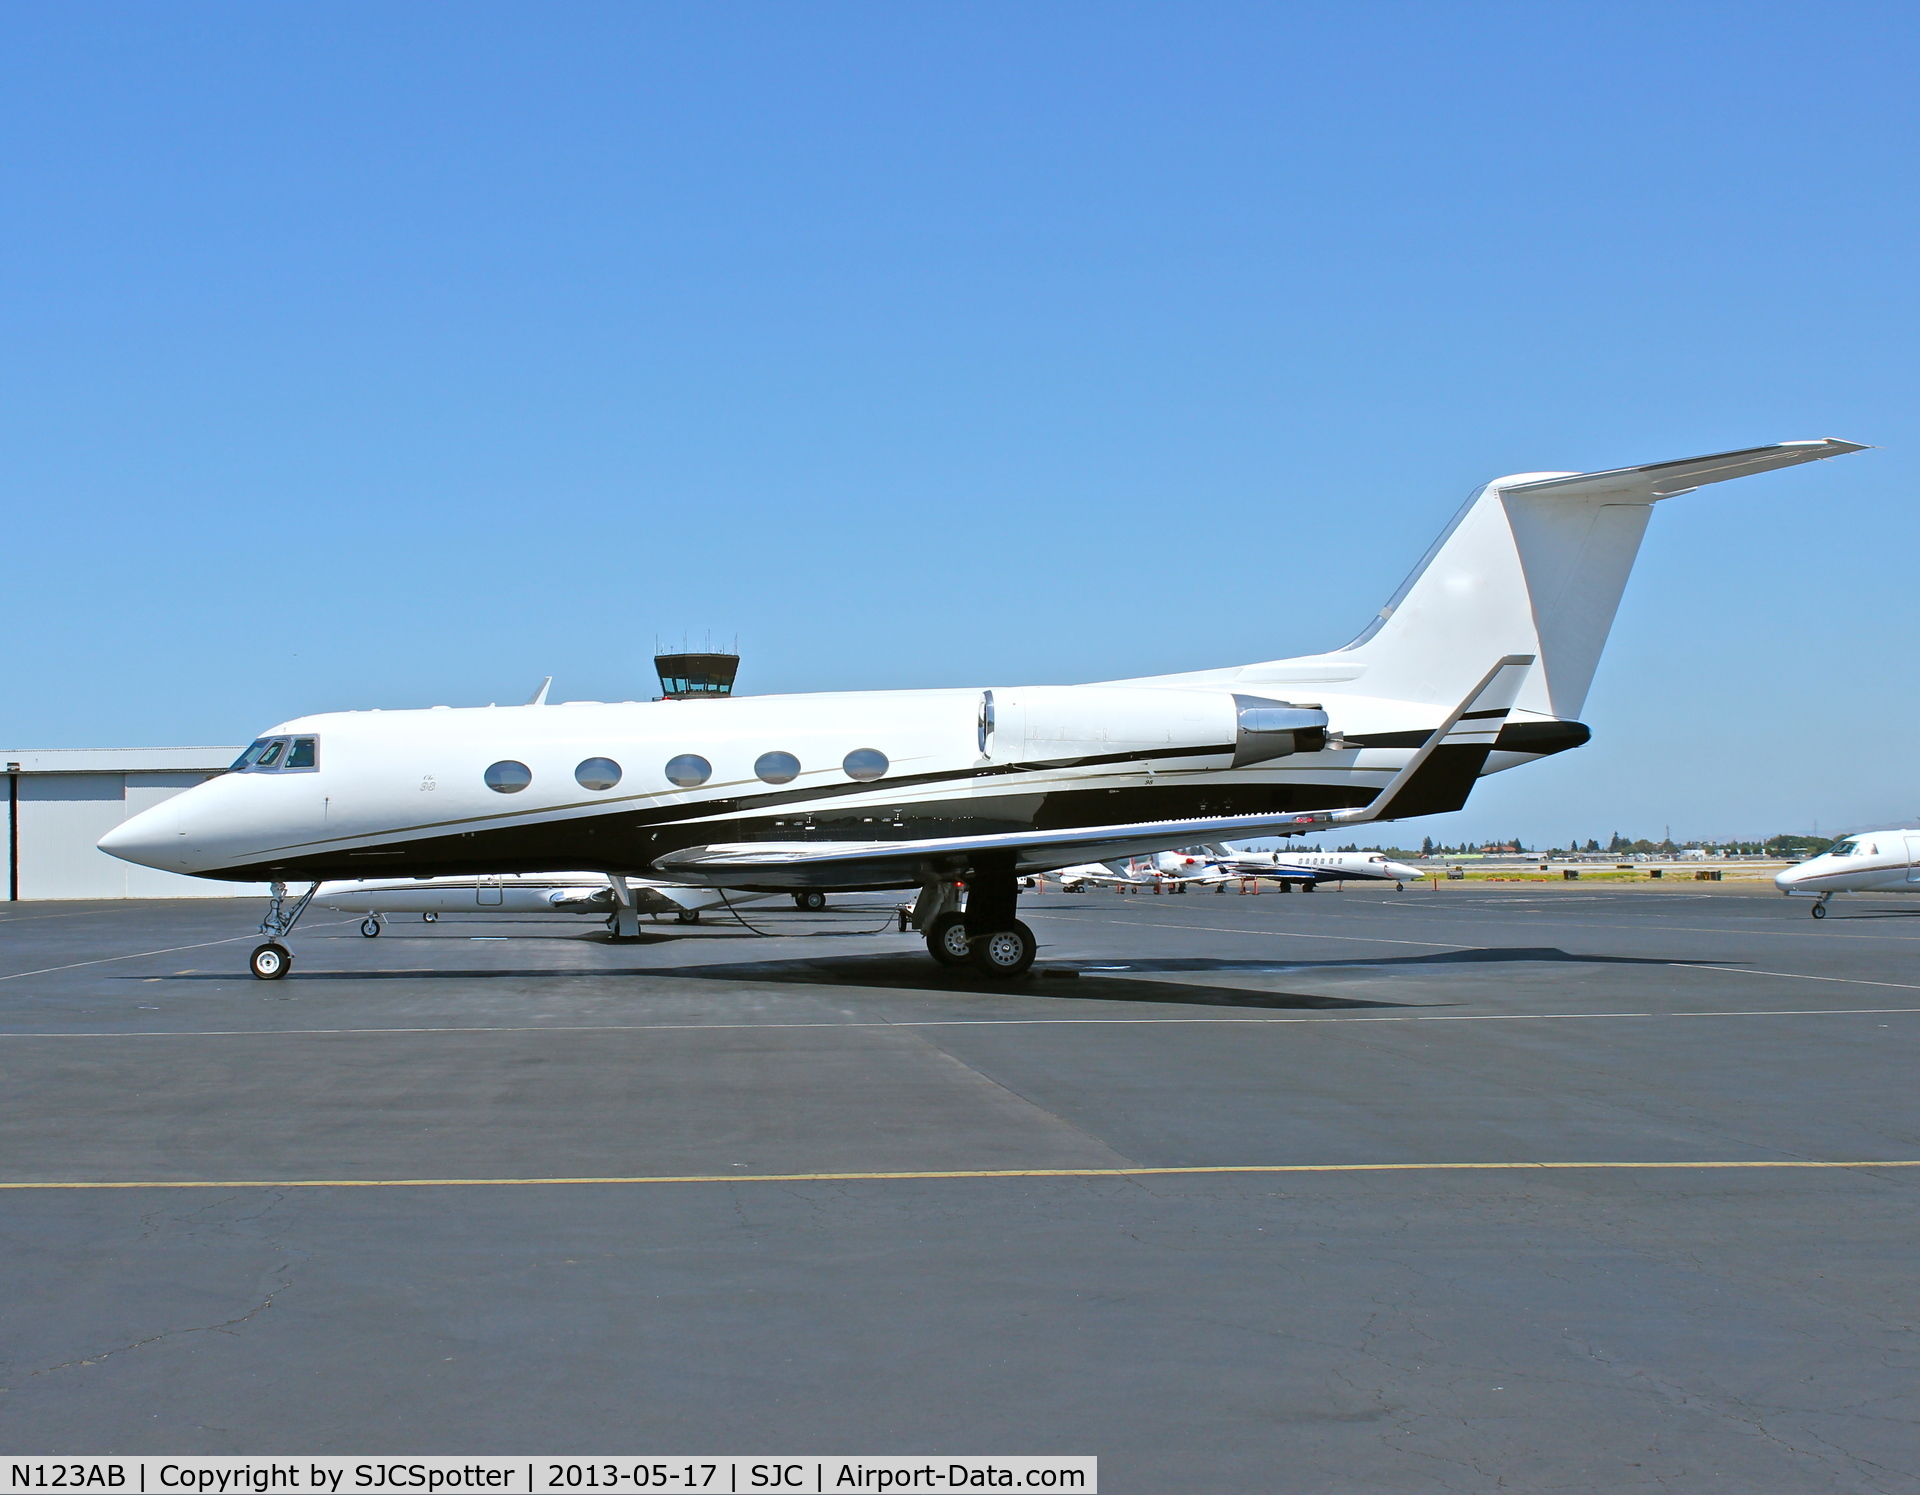 N123AB, 2005 Bombardier BD-700-1A10 Global Express XRS C/N 9167, Tail number edited out as requested by the pilots